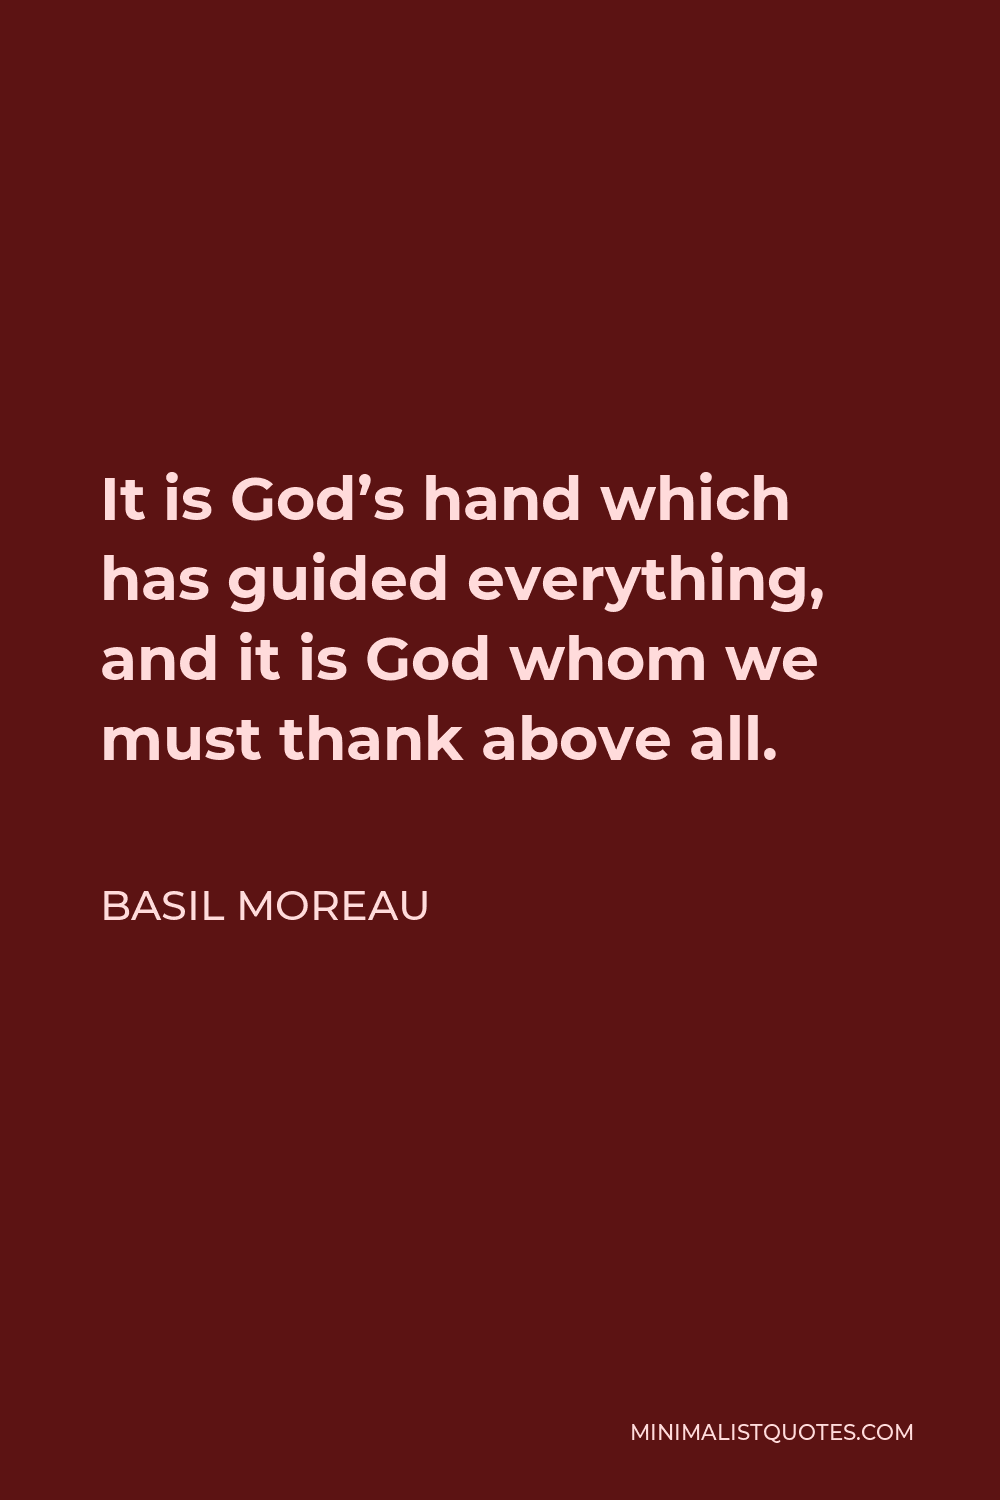 Basil Moreau Quote - It is God’s hand which has guided everything, and it is God whom we must thank above all.